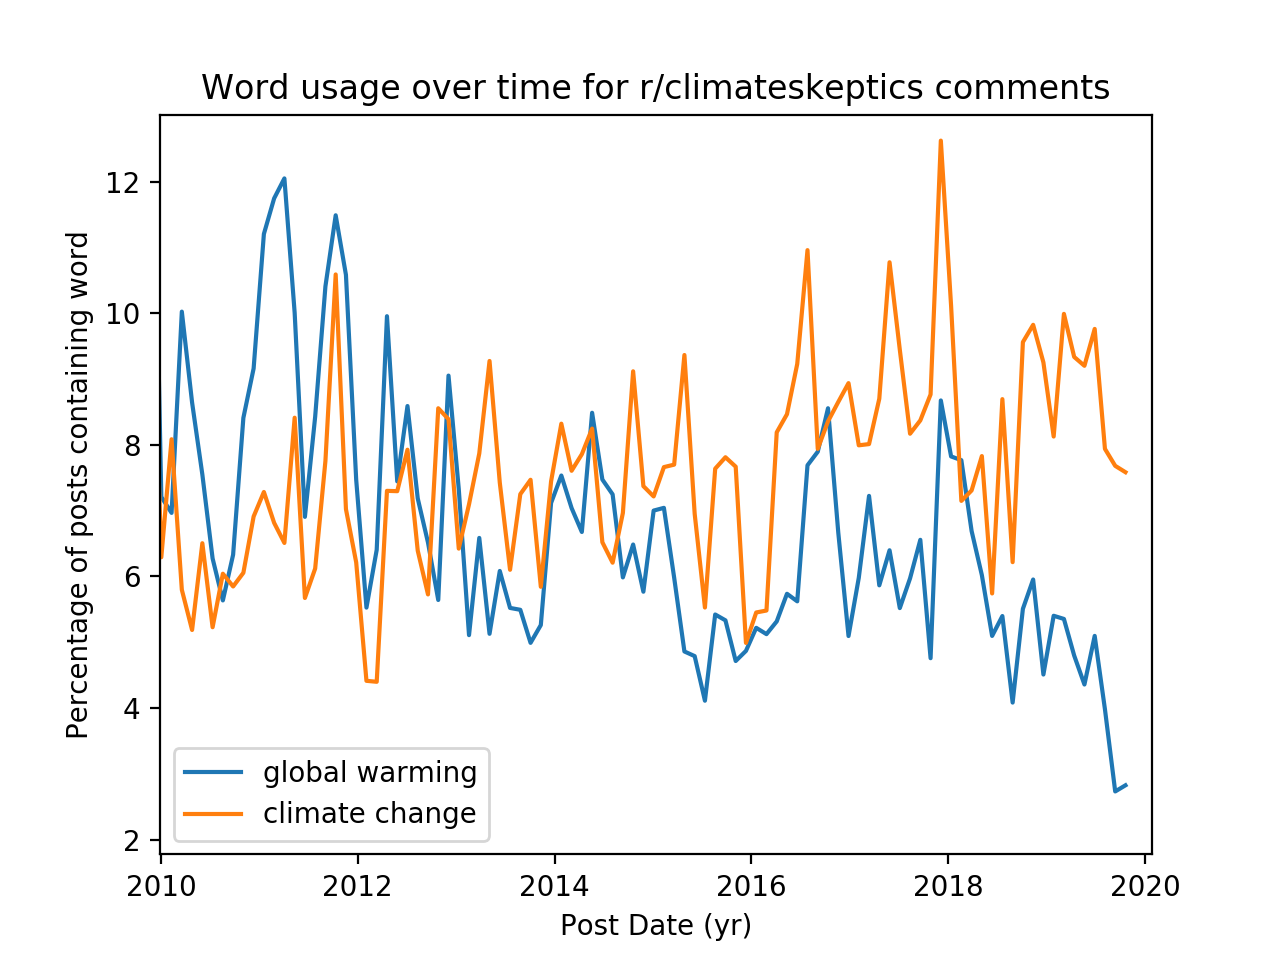 Comments in the subreddit r/climateskeptics that mention climate change or global warming